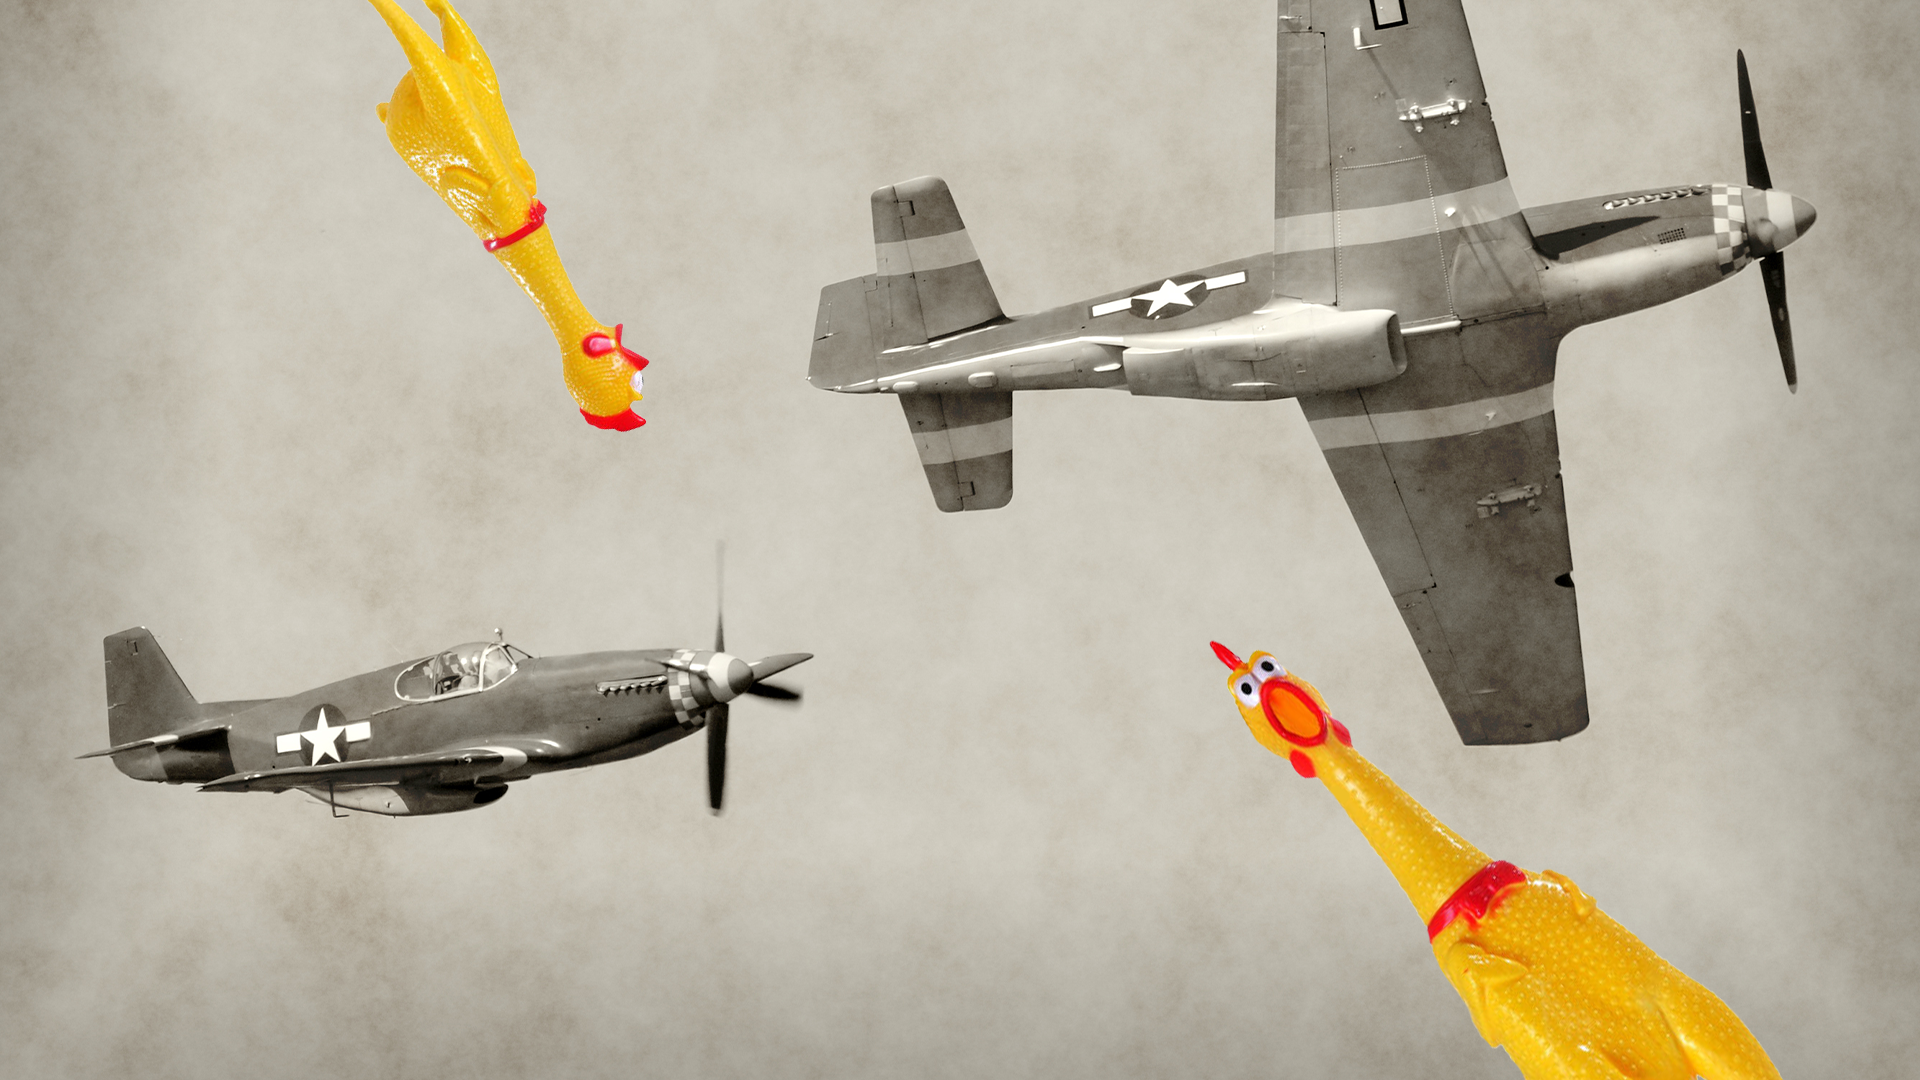 WW2 planes and rubber chickens